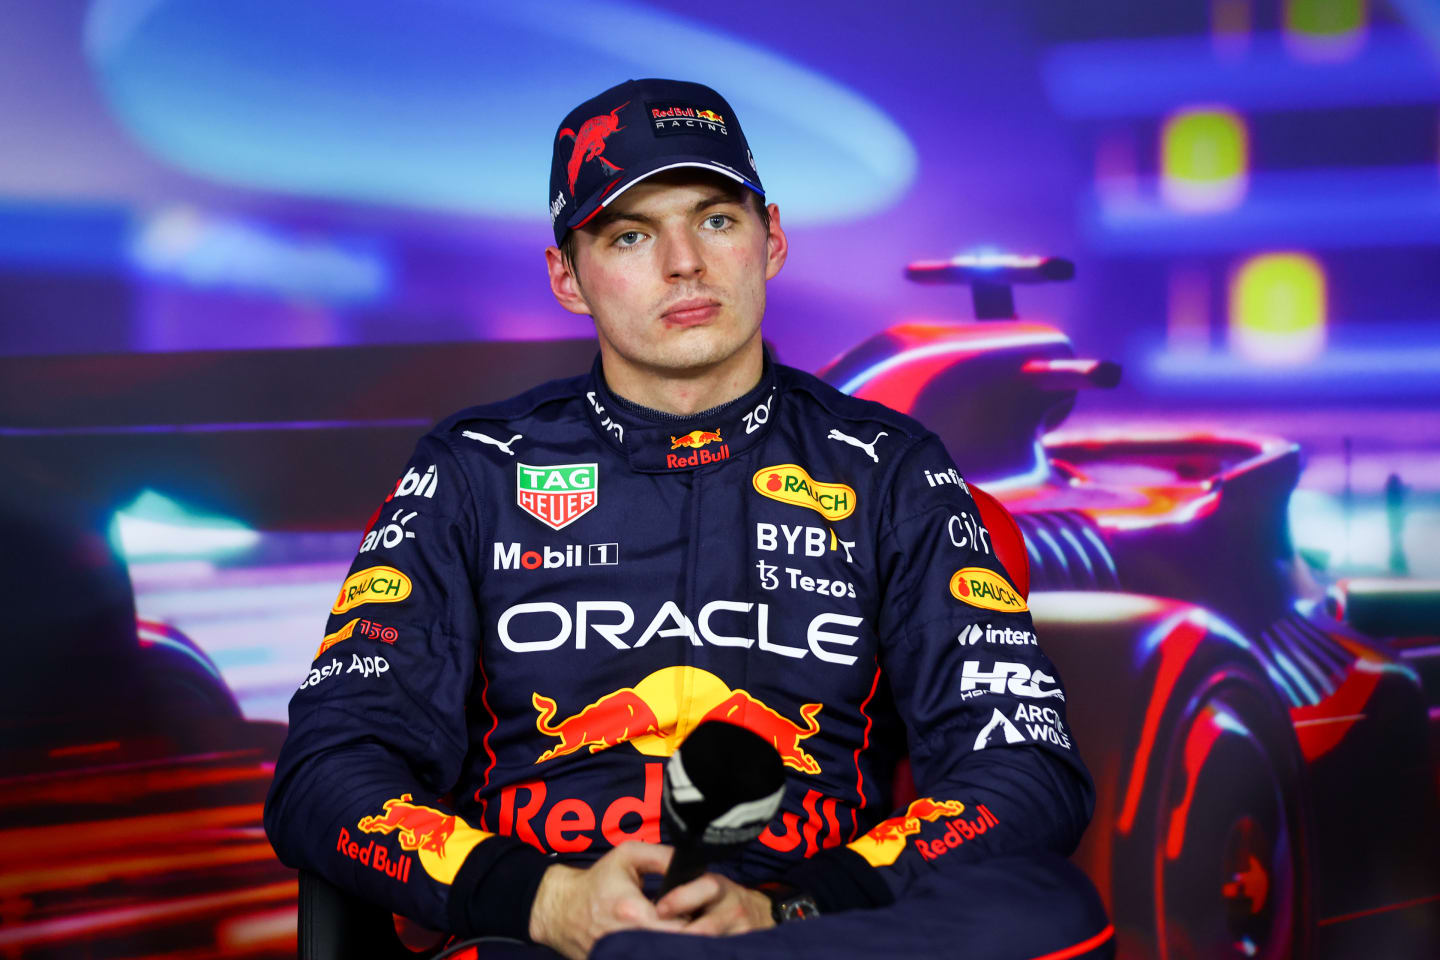 ABU DHABI, UNITED ARAB EMIRATES - NOVEMBER 19: Pole position qualifier Max Verstappen of the Netherlands and Oracle Red Bull Racing attends a drivers press conference following qualifying ahead of the F1 Grand Prix of Abu Dhabi at Yas Marina Circuit on November 19, 2022 in Abu Dhabi, United Arab Emirates. (Photo by Dan Istitene/Getty Images)